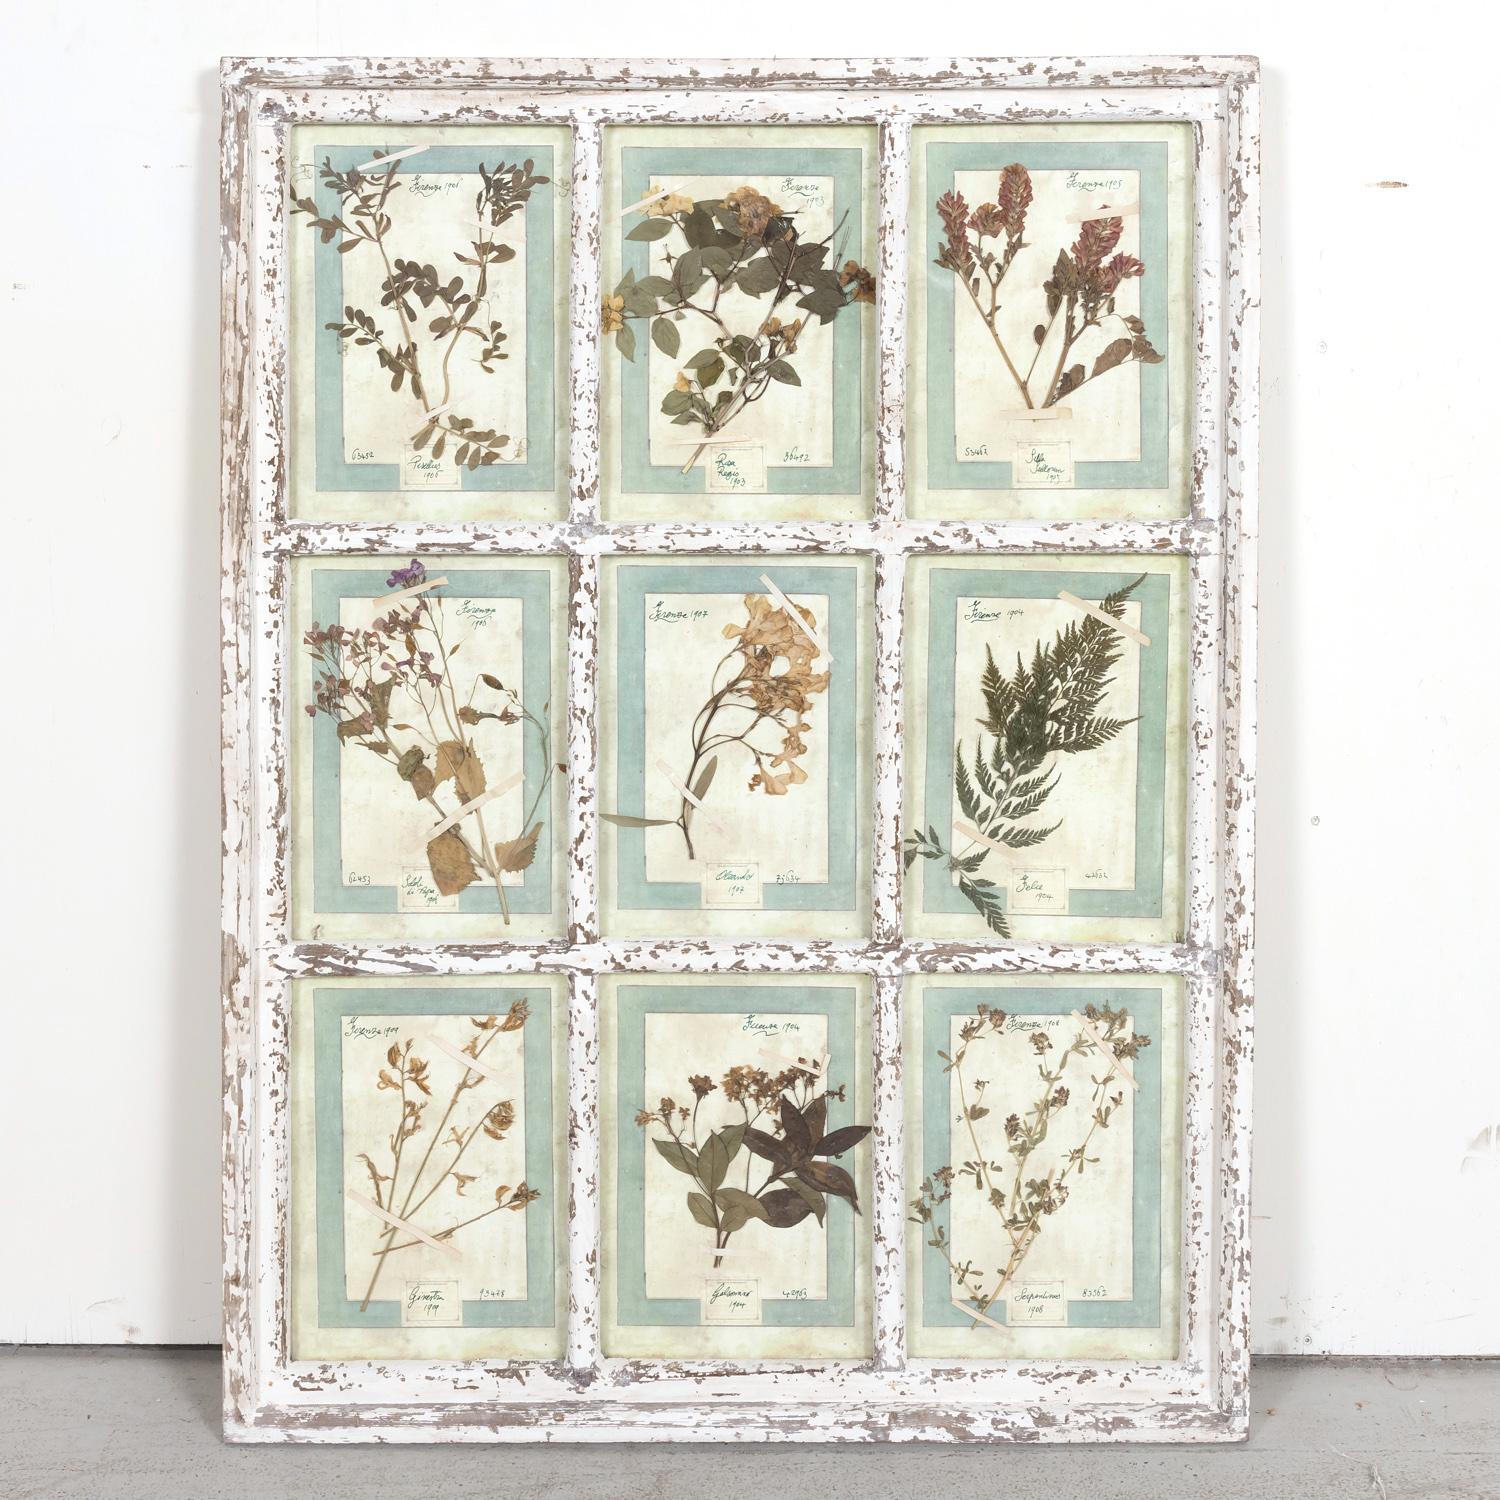 A beautiful and decorative collection of nine early 20th century Italian herbiers framed in a large painted white nine-pane window frame, each catalogued by hand with the Latin or botanical name of the plant, the date, catalog number, and 